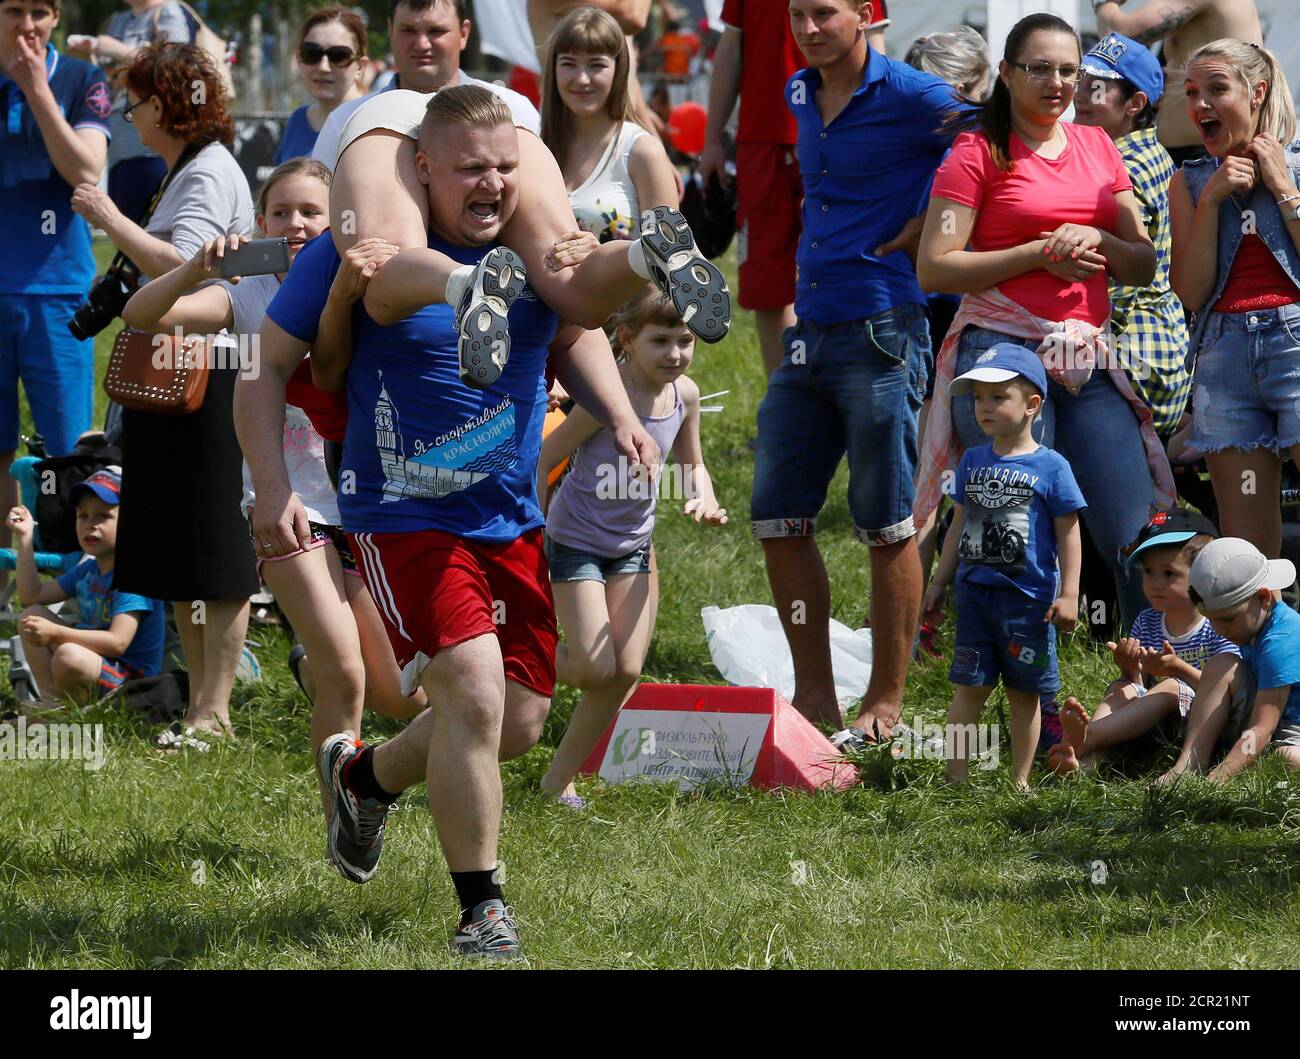 A man carries his wife while racing in the Wife Carrying competititon to mark the City Day in Krasnoyarsk, Siberia, Russia, June 10, 2017. Picture taken June 10, 2017. REUTERS/Ilya Naymushin Stock Photo